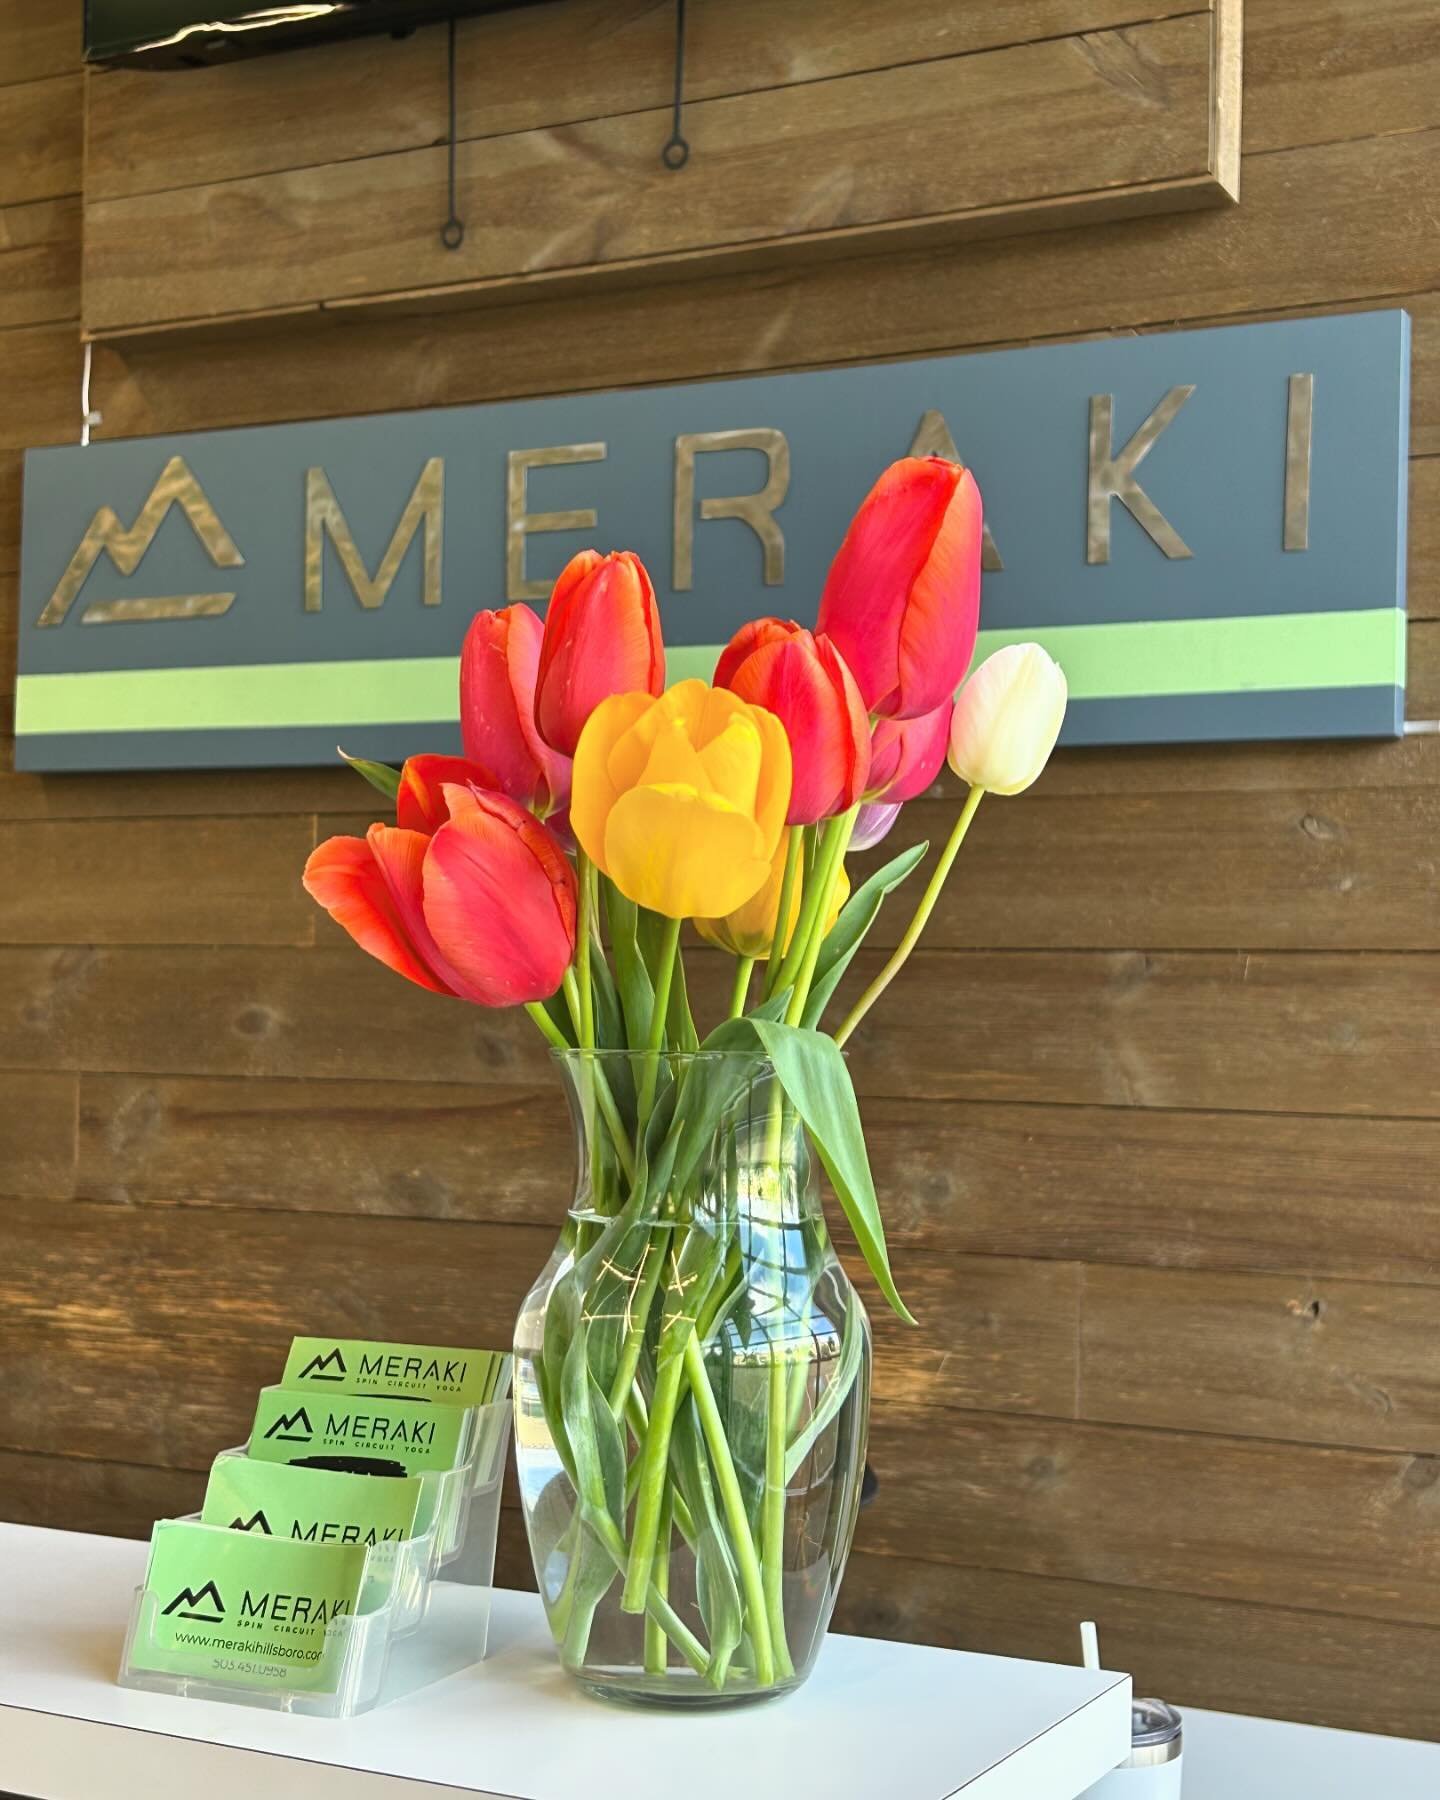 Did you know that if you drop a penny in the water with your tulips it will keep them from drooping?!? Thank you to our member Erin for that little tip!